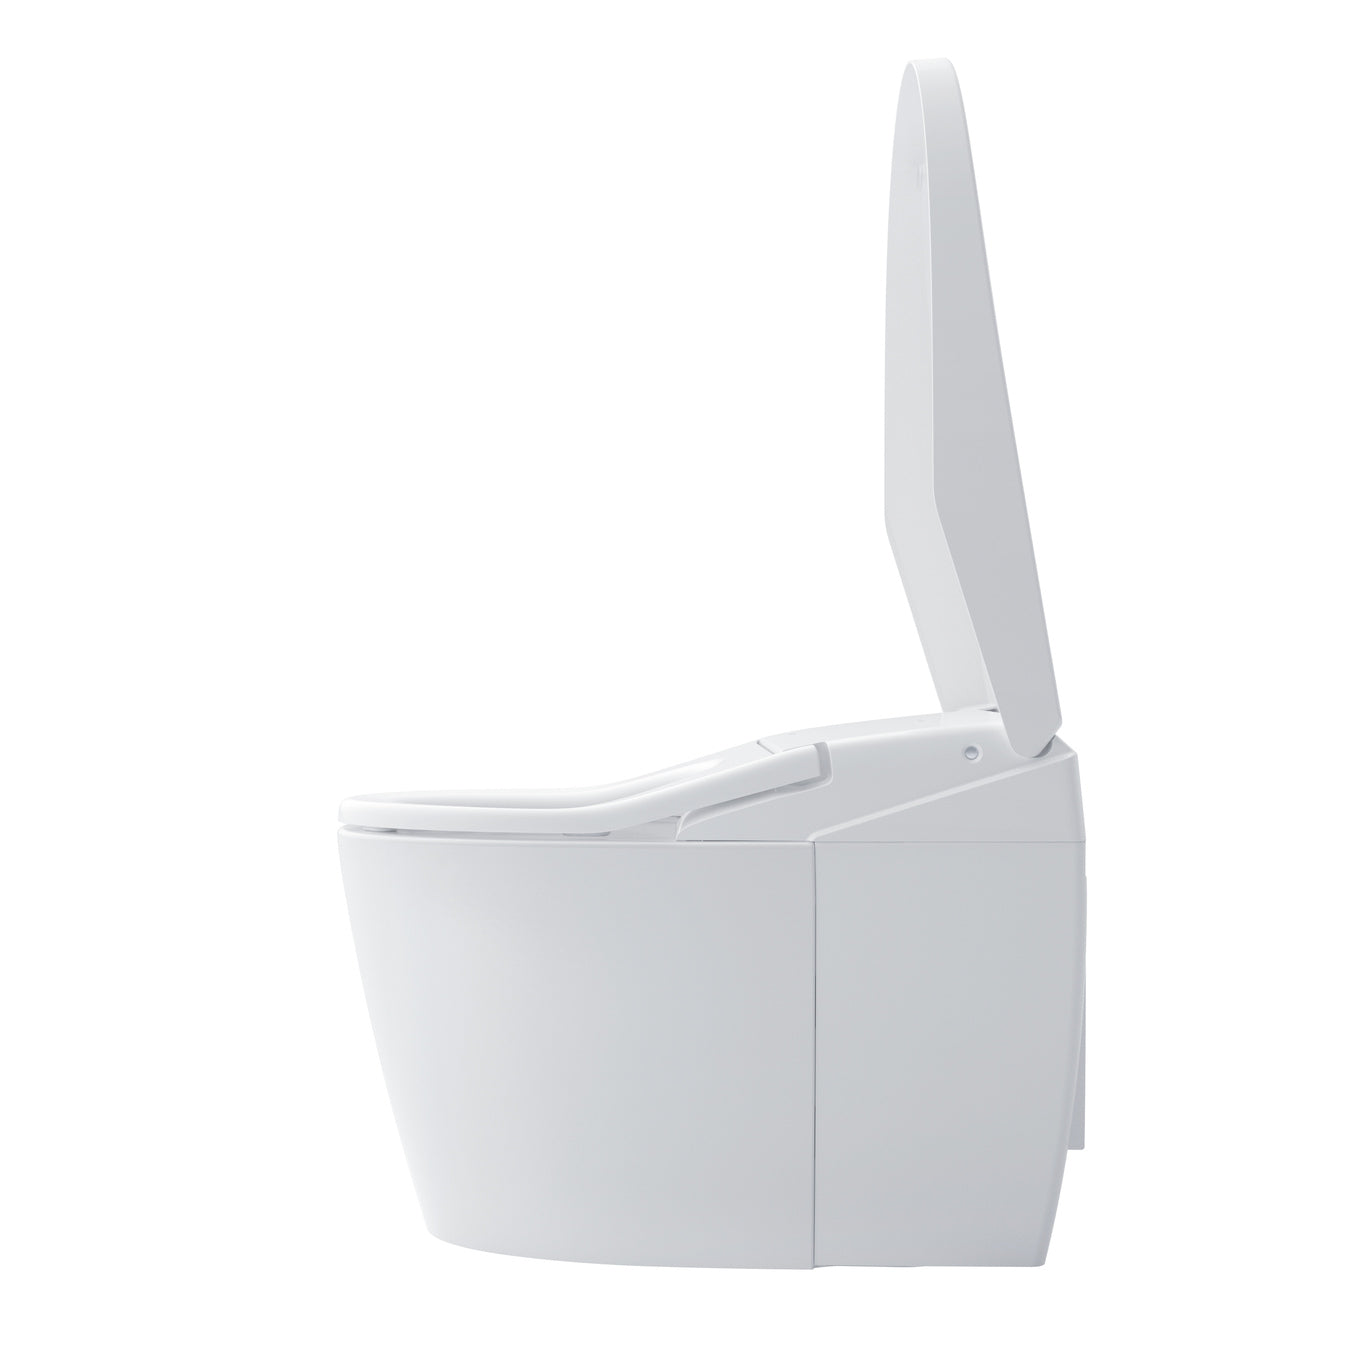 NEOREST AS MS8551CUMFG#01 Dual Flush 1.0 or 0.8 GPF Toilet with Integrated Bidet Seat and EWATER+, Cotton White